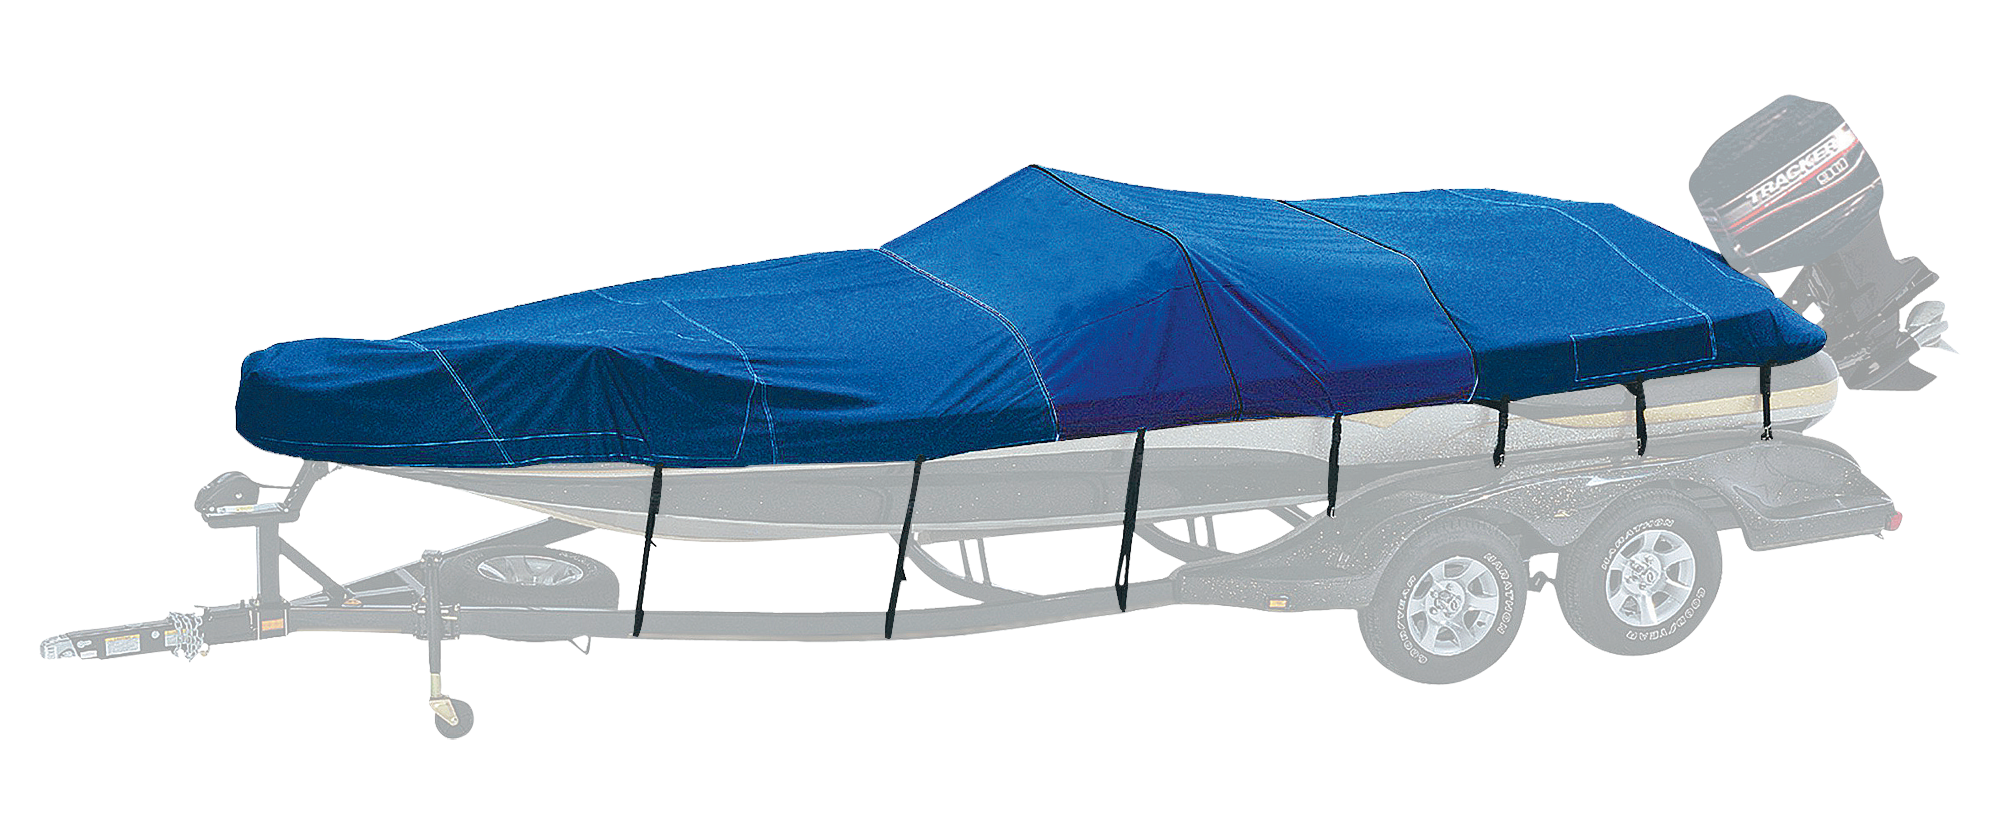 Bass Pro Shops Exact Fit Custom Boat Cover by Westland for NITRO NX 896 Models